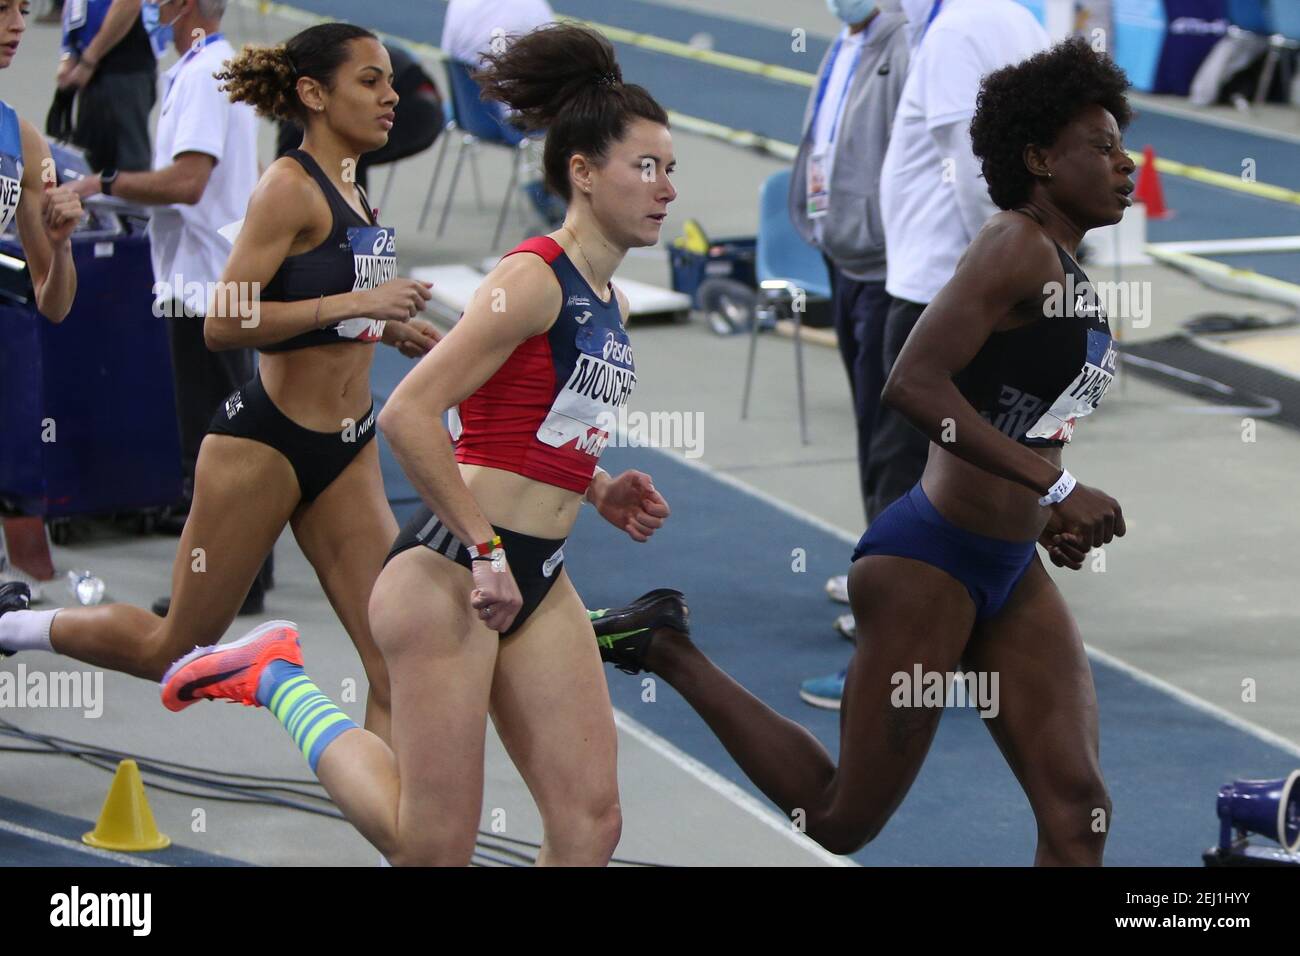 KANDISSOUNON Lena of Haute Bretagne Athletisme ,MOUCHET Charlotte of Amiens  UC and YARIGO Noelie of Running 41 then Finale 800 m Women during the French  Indoor Athletics Championships 2021 on February 20,